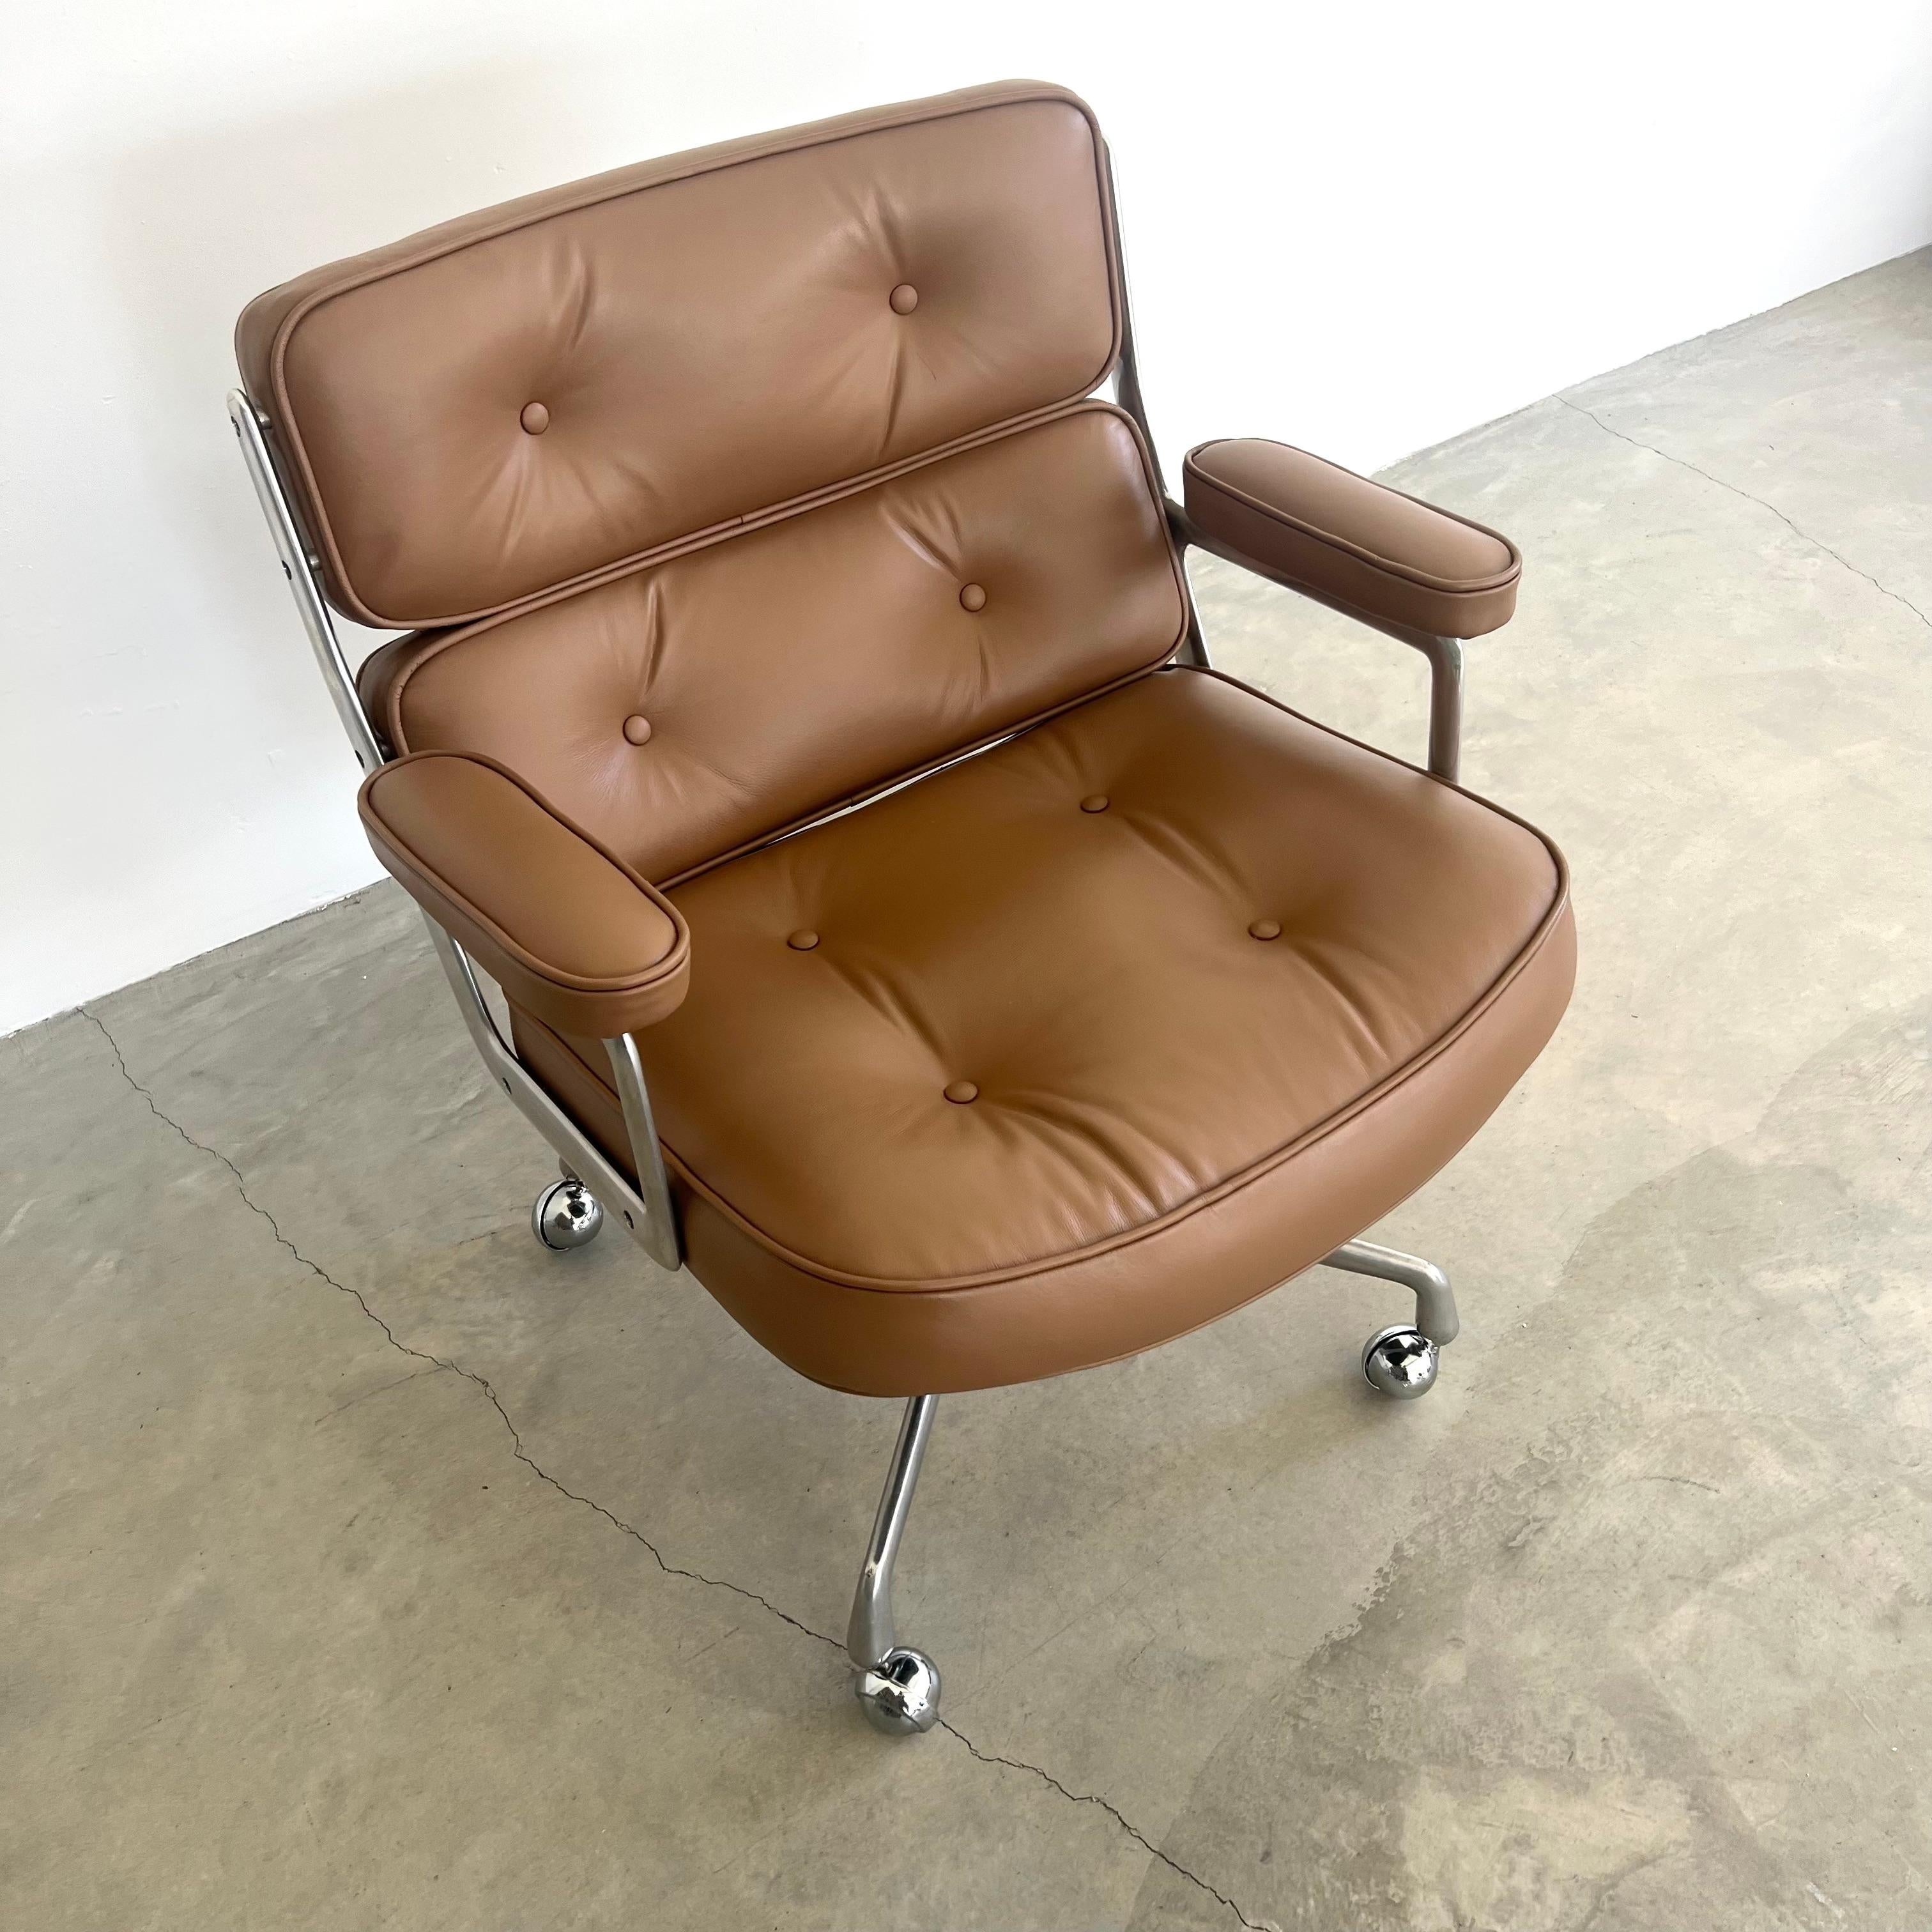 Aluminum Eames Time Life Lobby Lounge Chair in Tan Leather for Herman Miller, 1980s USA